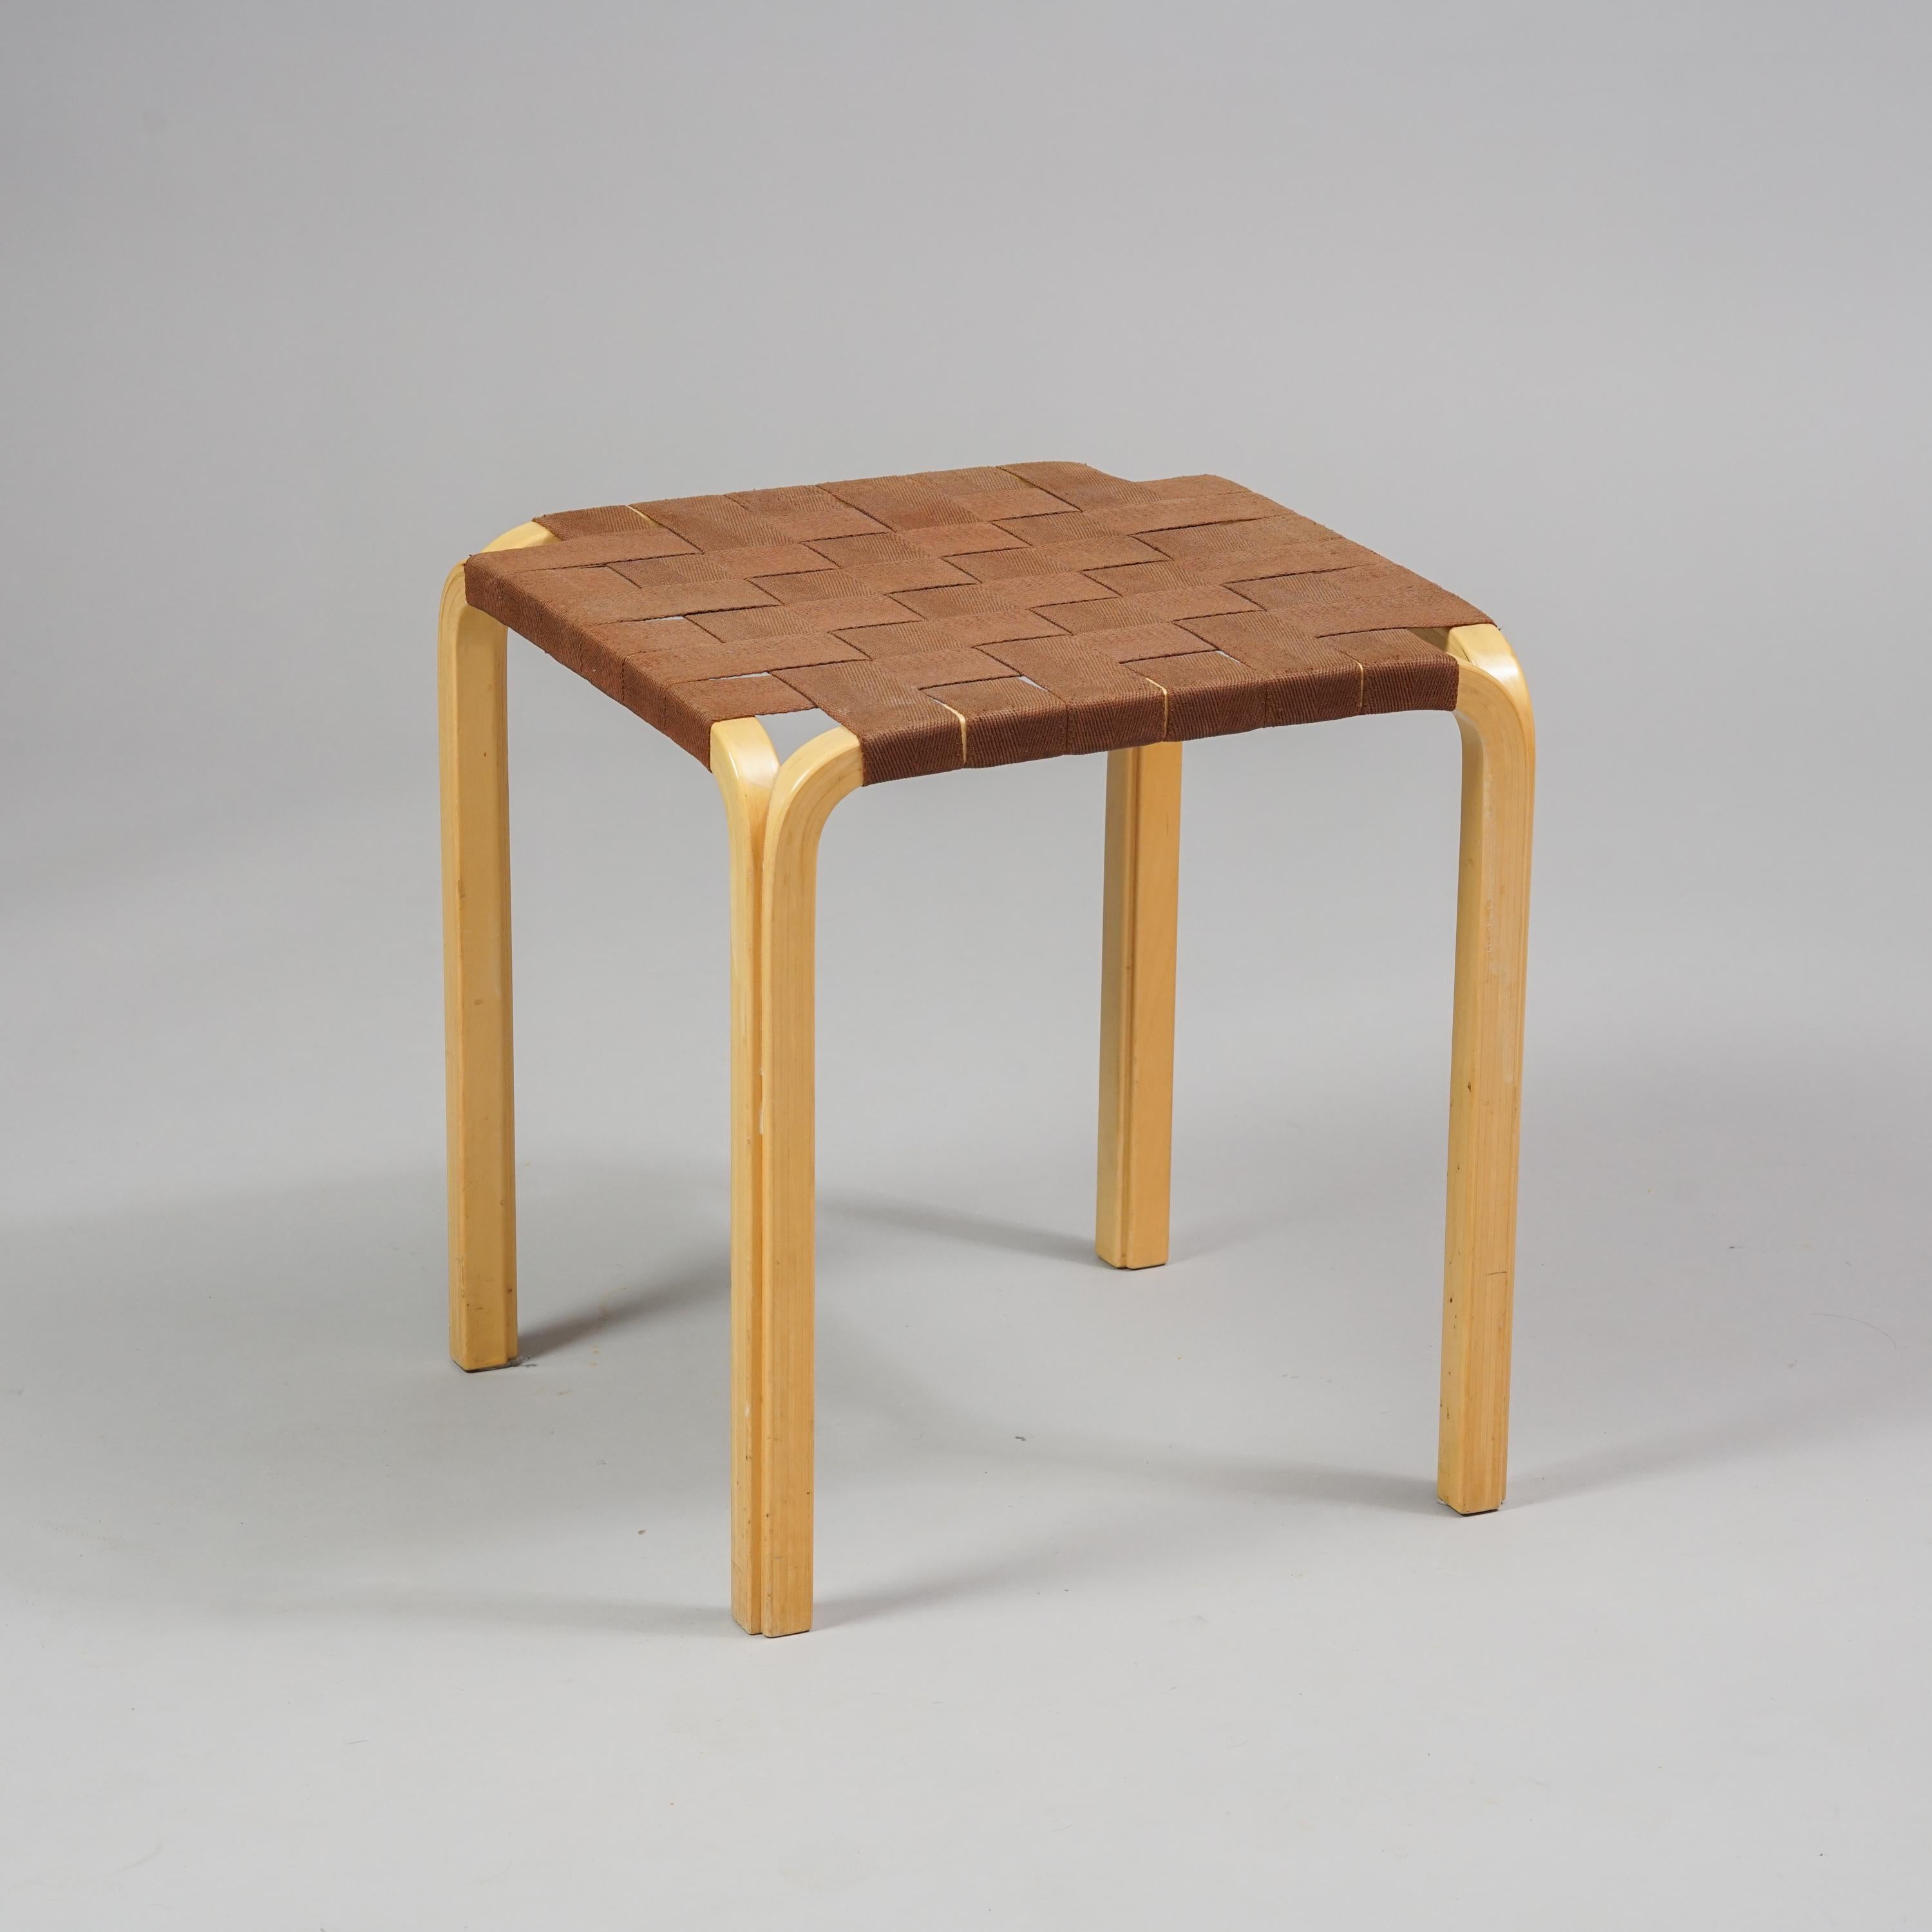 Alvar Aalto model Y 61 stool. Manufactured by Artek in the 1970s / 1980s. The stools have the iconic birch Y -leg design with brown linen webbing. The stool is in good vintage condition, minor wear consistent with age and use. 

The leg